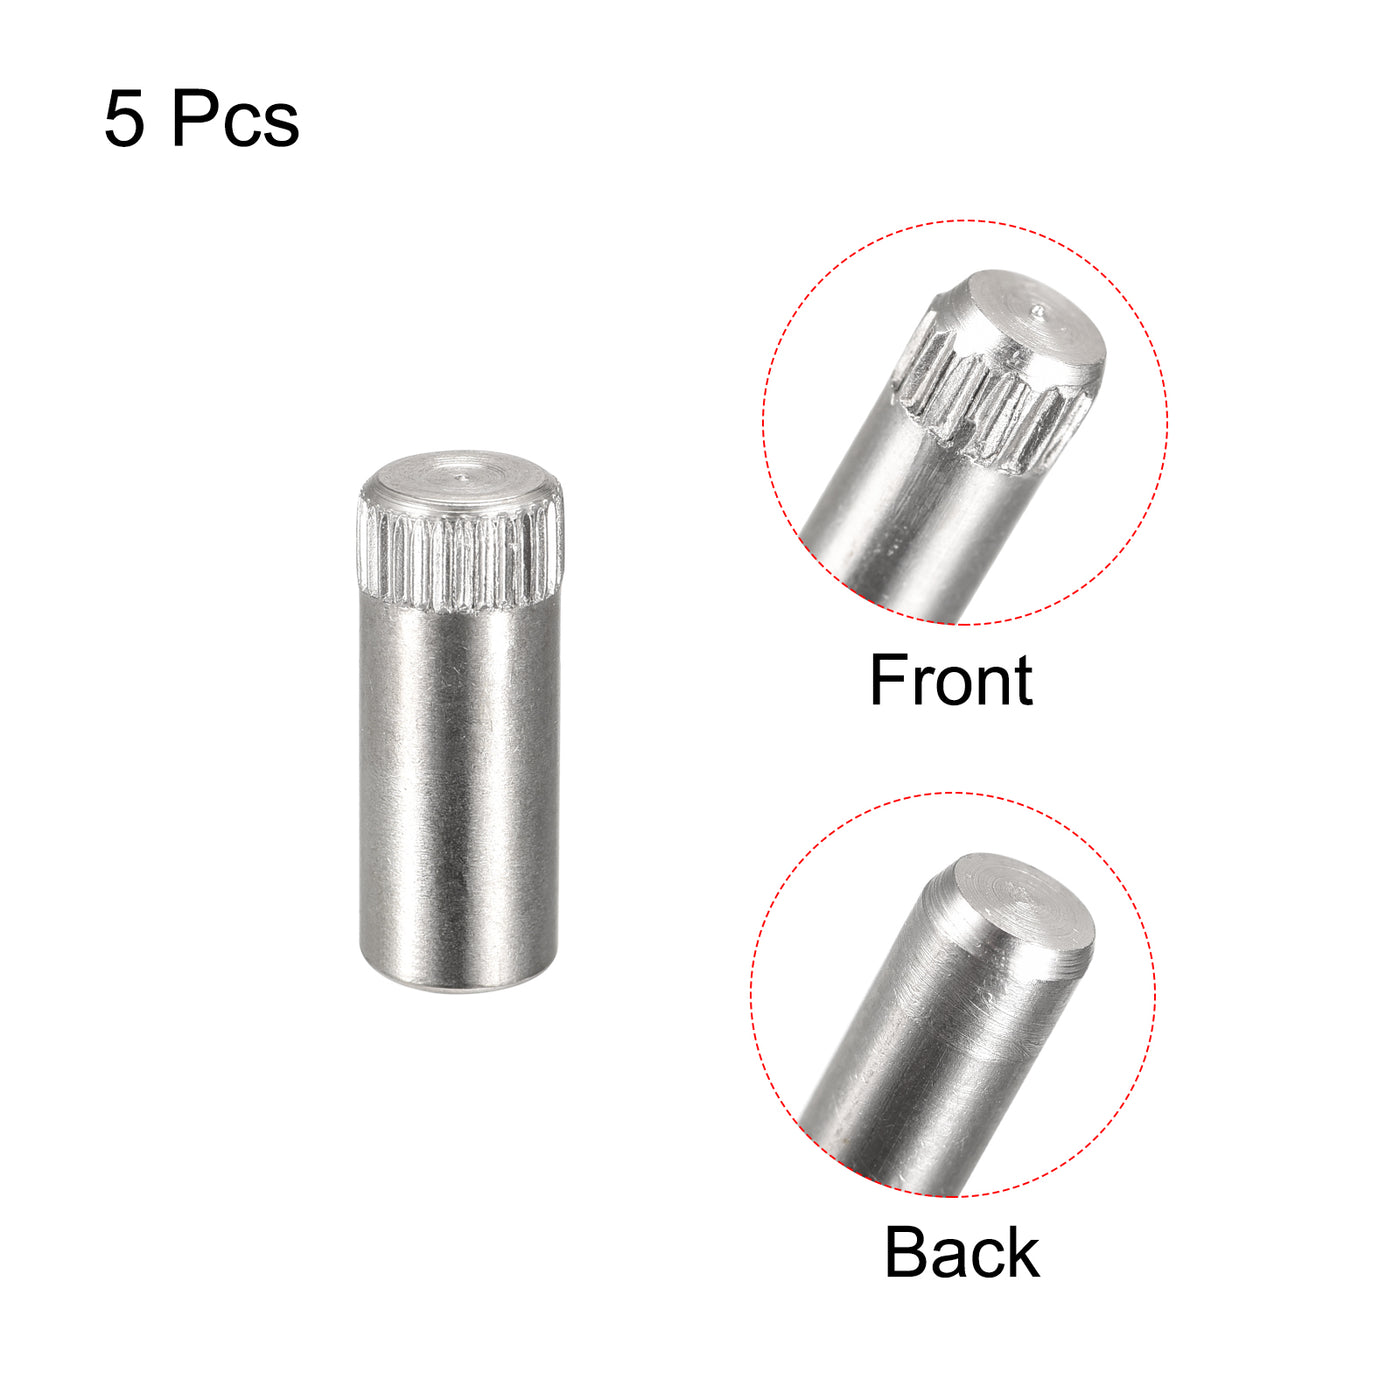 uxcell Uxcell 8x20mm 304 Stainless Steel Dowel Pins, 5Pcs Knurled Head Flat End Dowel Pin